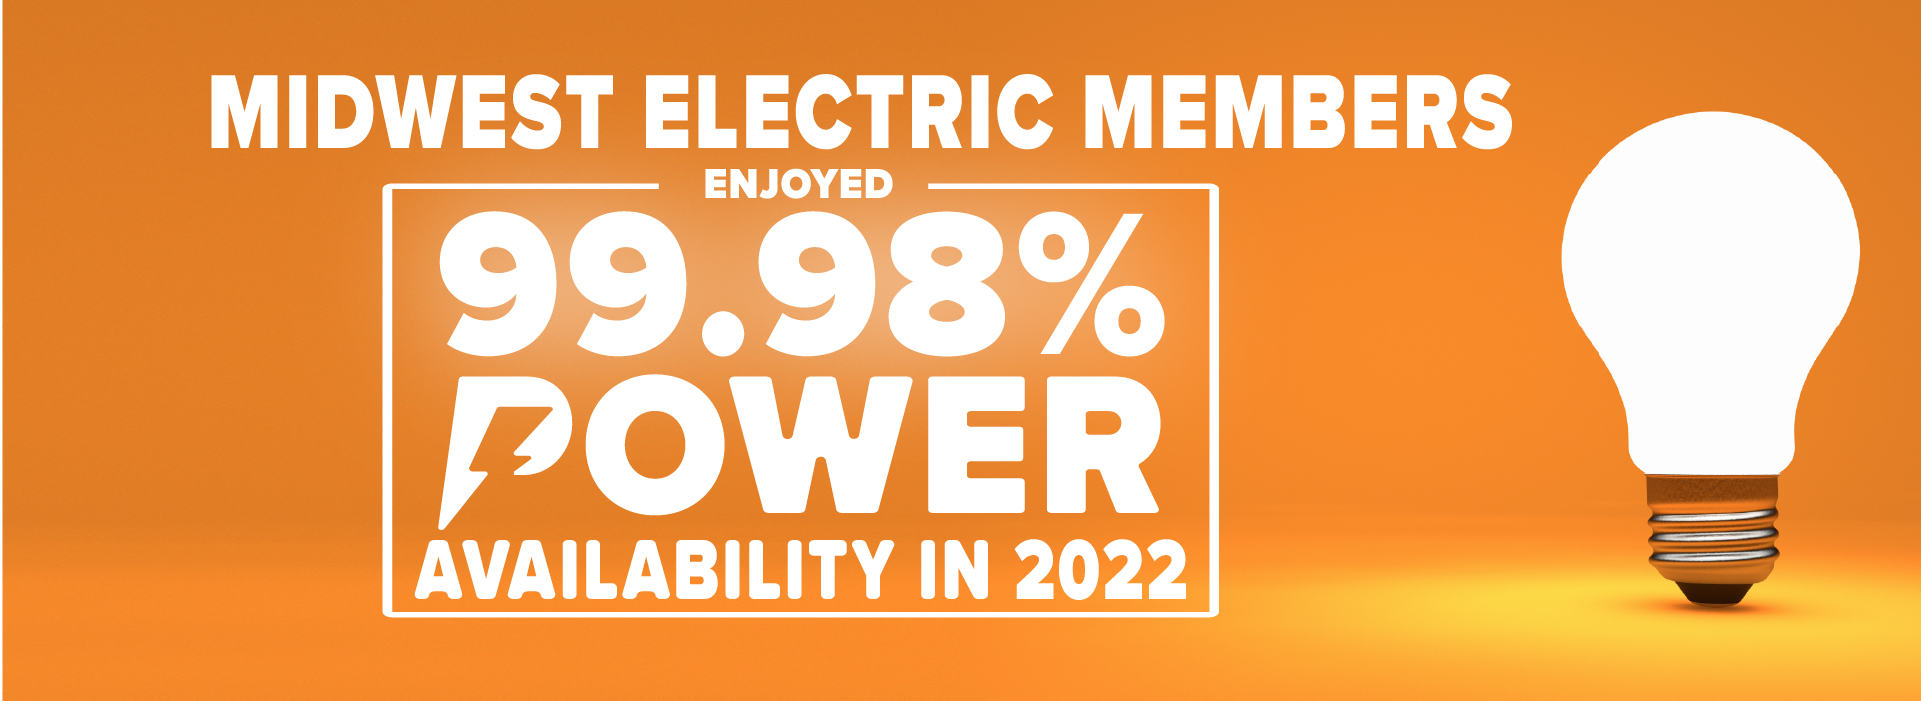 Power availability in 2022